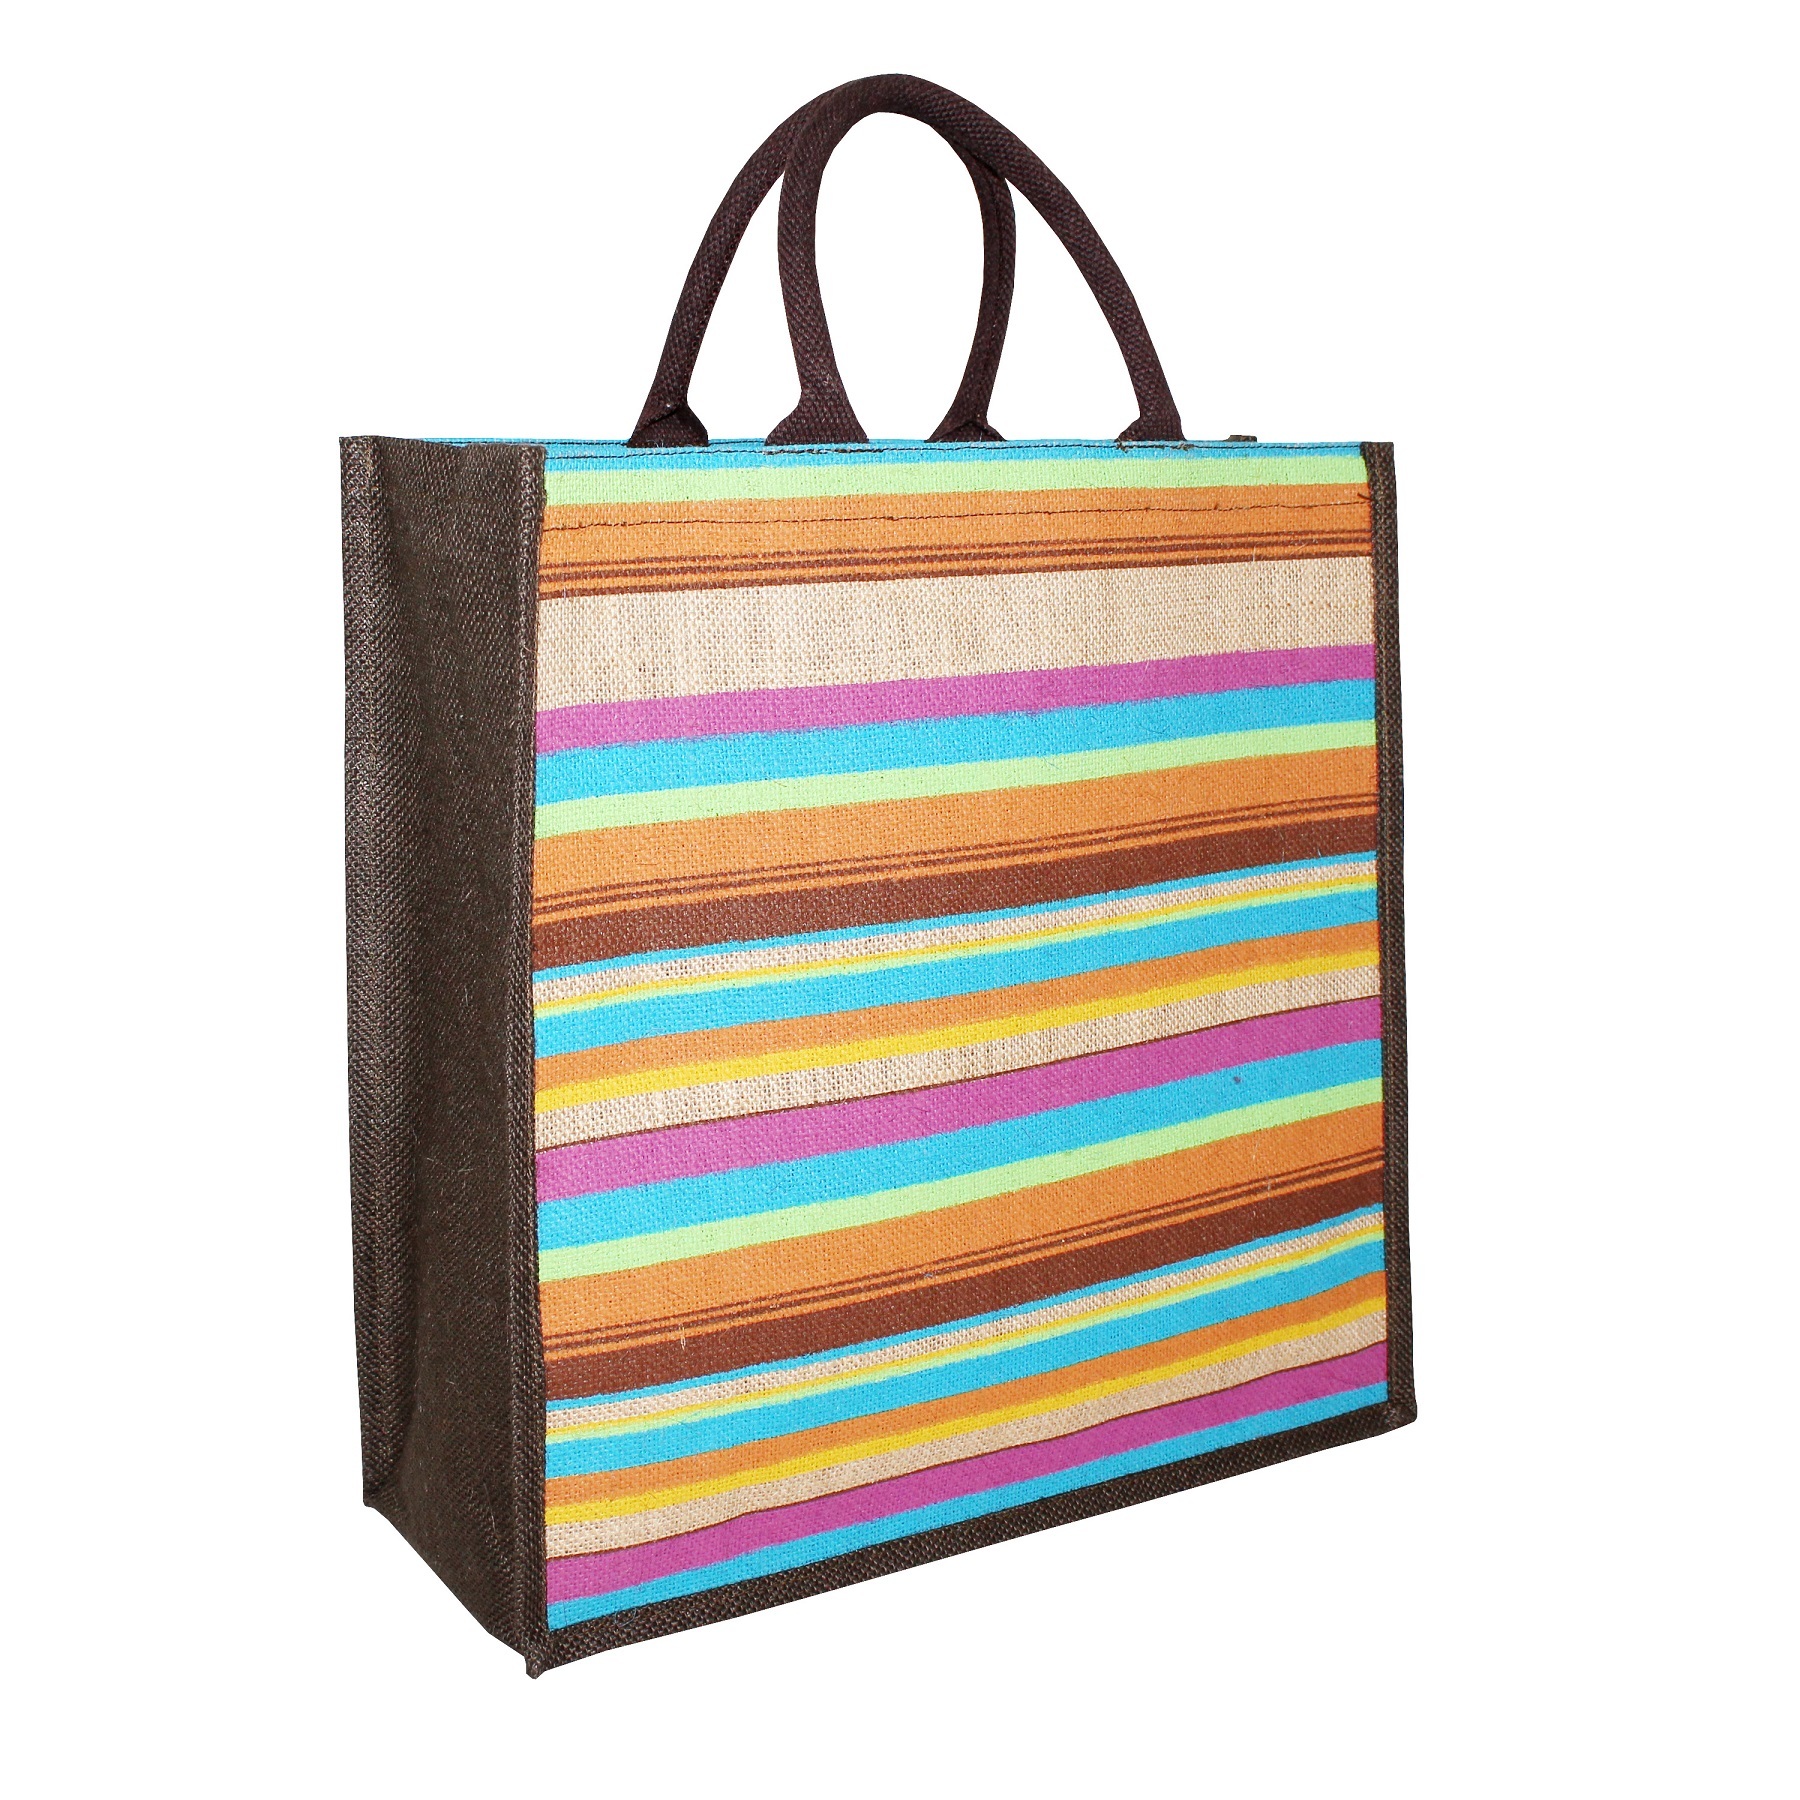 Padded Rope Handle PP Laminated Allover Striped Print Natural Color Jute Tote Bag